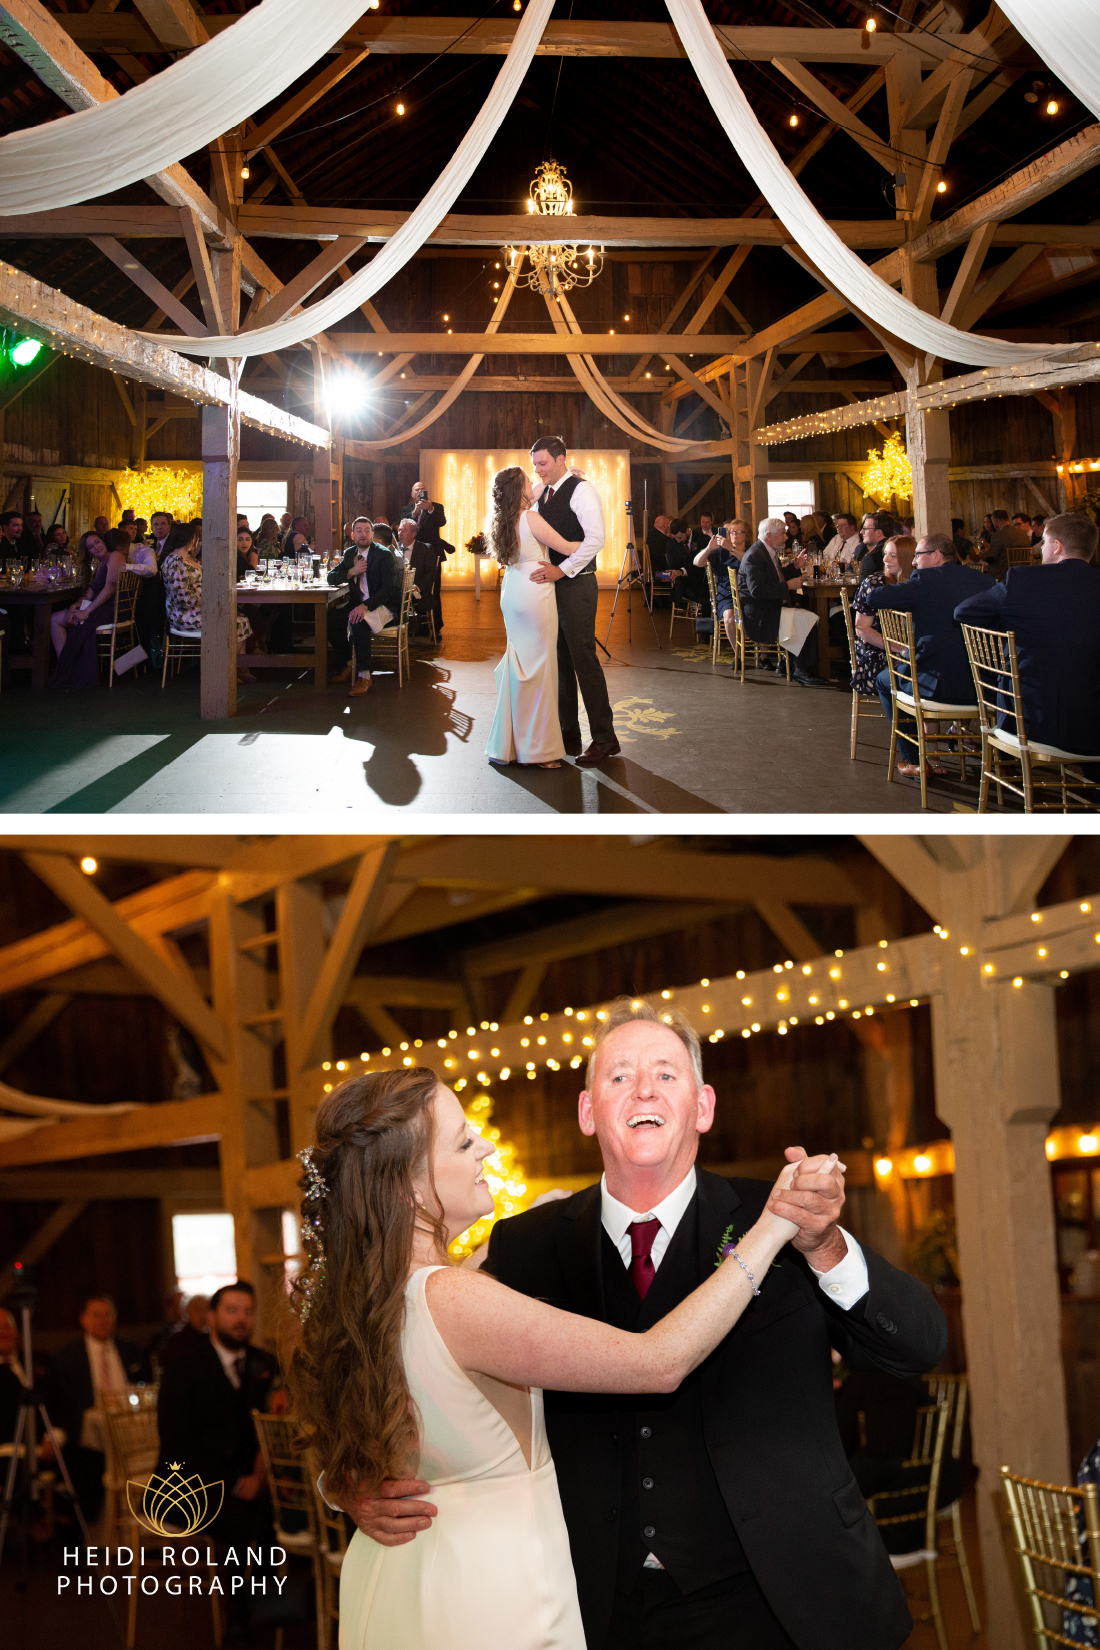 Bride dancing with father at Mount Pocono wedding reception by Heidi Roland Photography